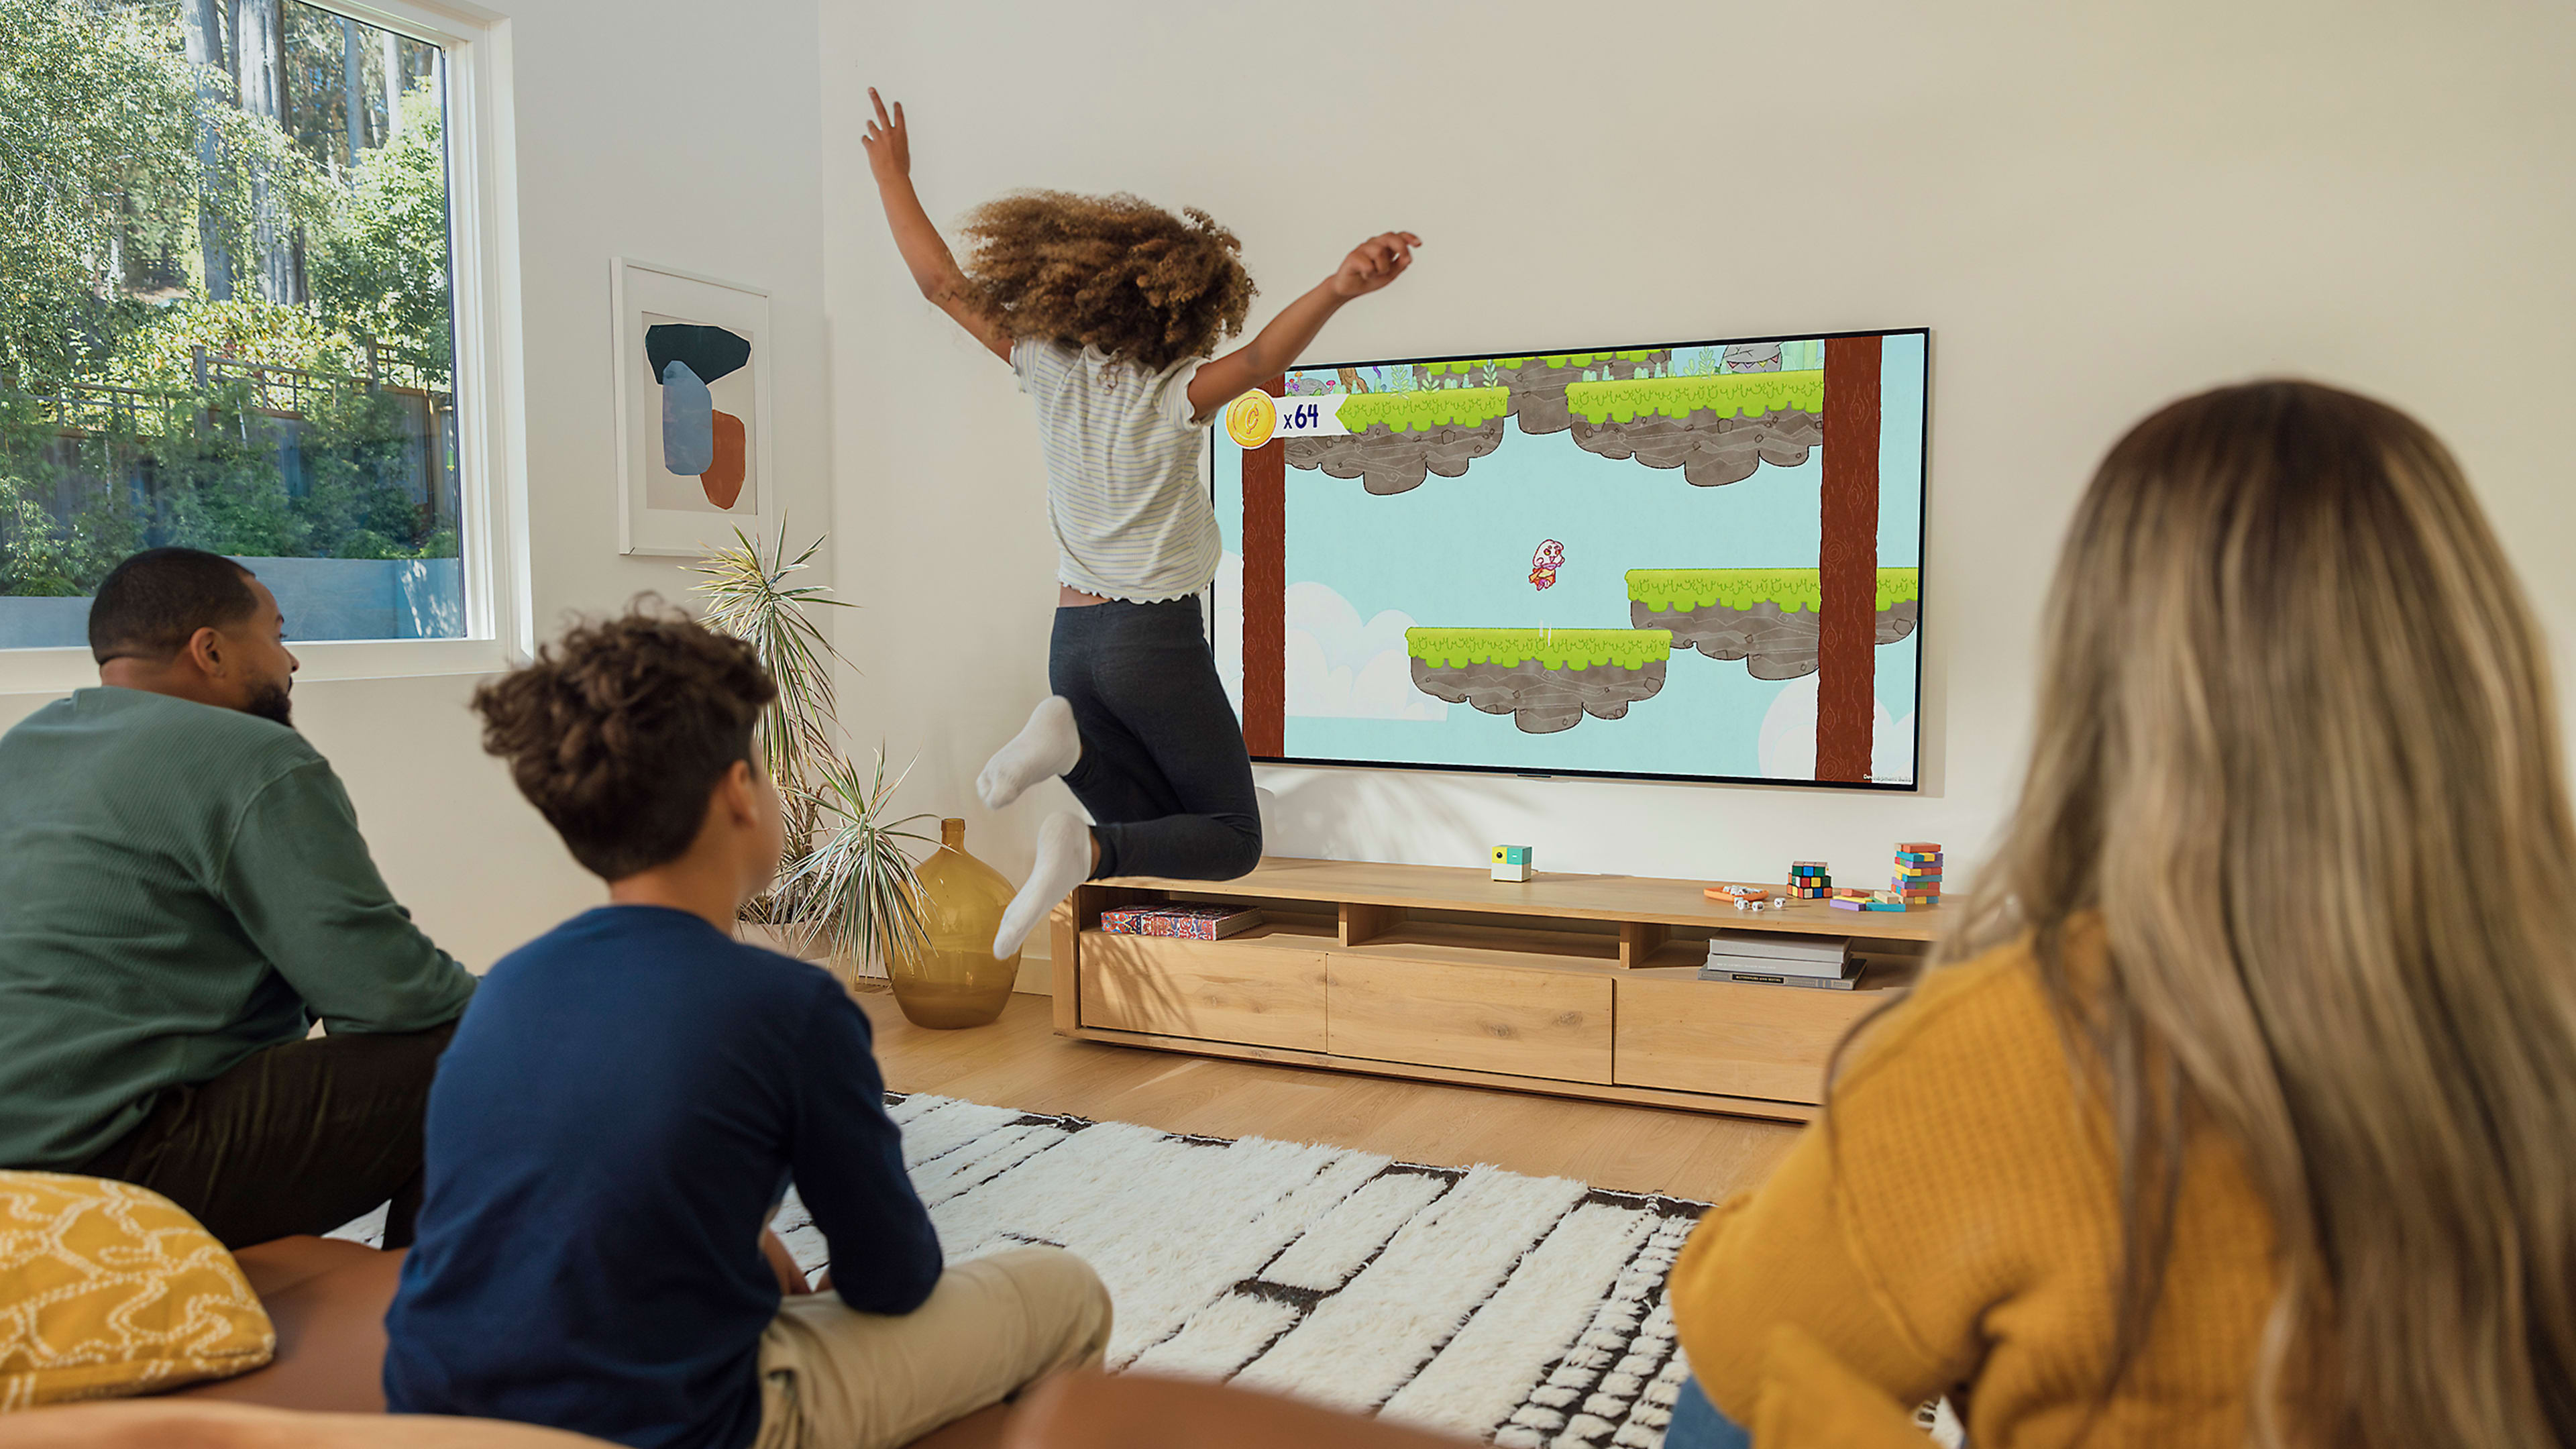 How Nex Playground designed a gaming console for kids that won’t make them couch potatoes